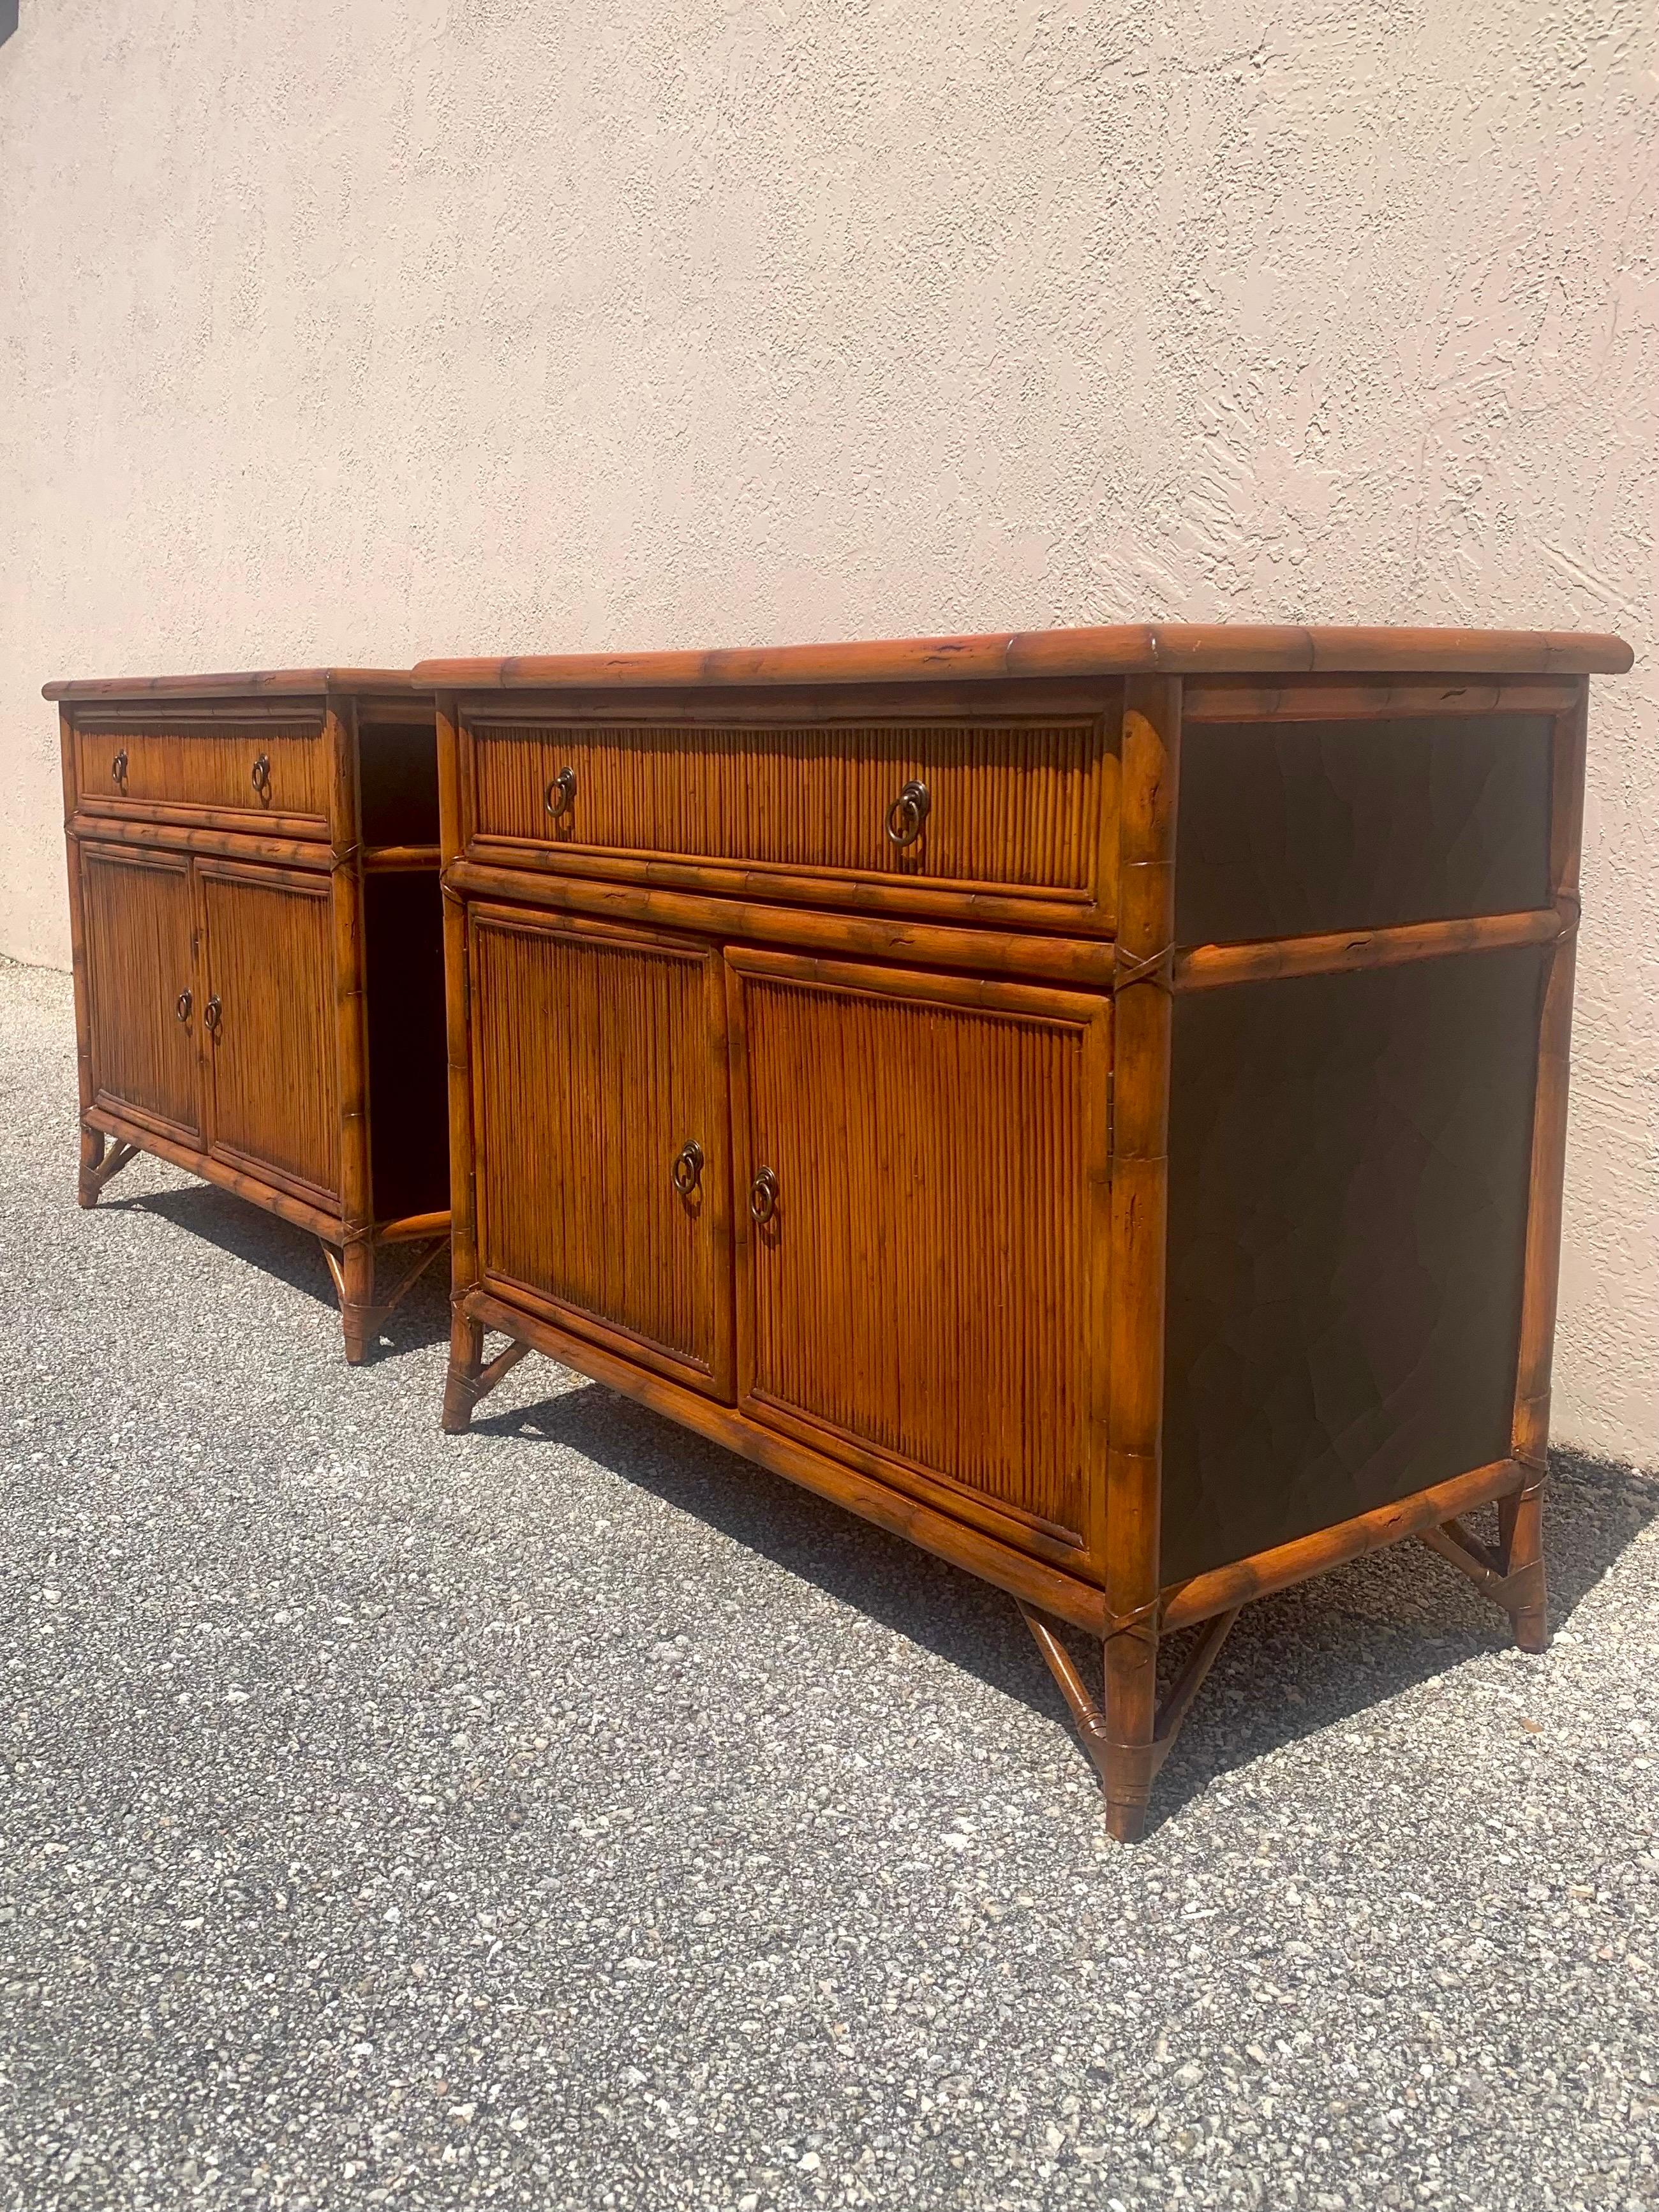 A beautiful pair of Regency style Bachelor chests or Nightstands. 

Made by Baker Furniture. 

Made with a bamboo frame, pencil Reed fronts and a faux crackle leather top. 

Finished to mimic burnt bamboo found throughout different British